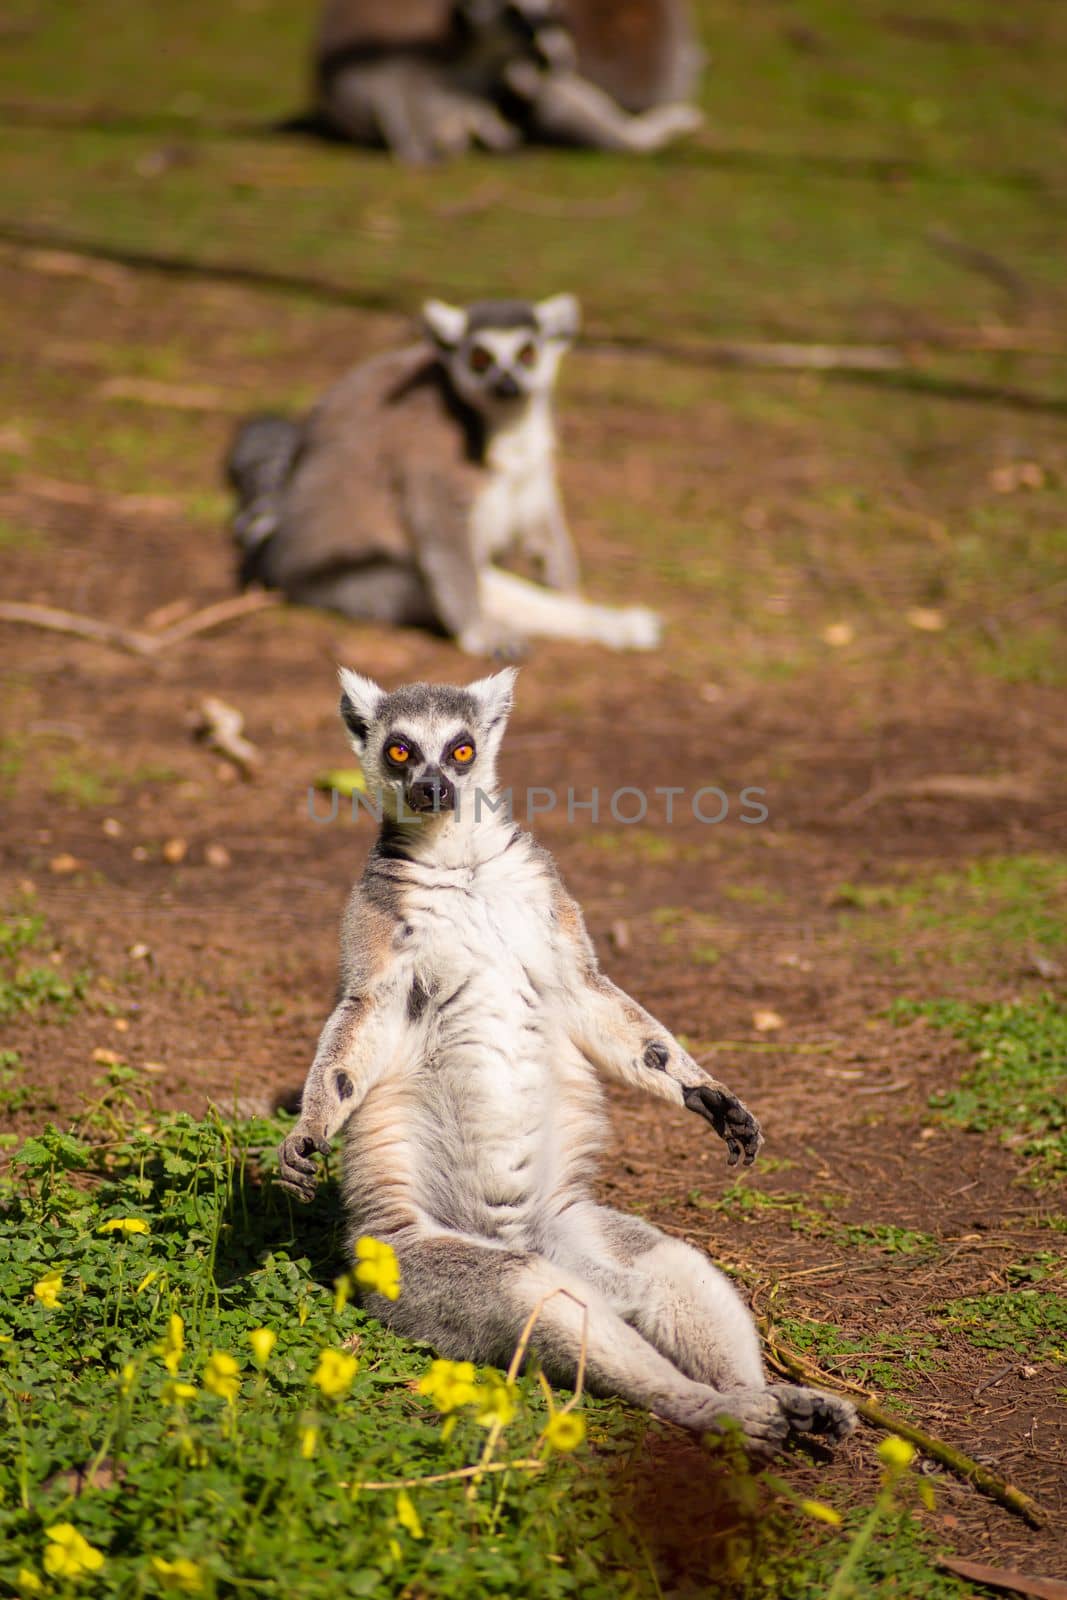 Lemur on the lawn basking in the sun by Try_my_best